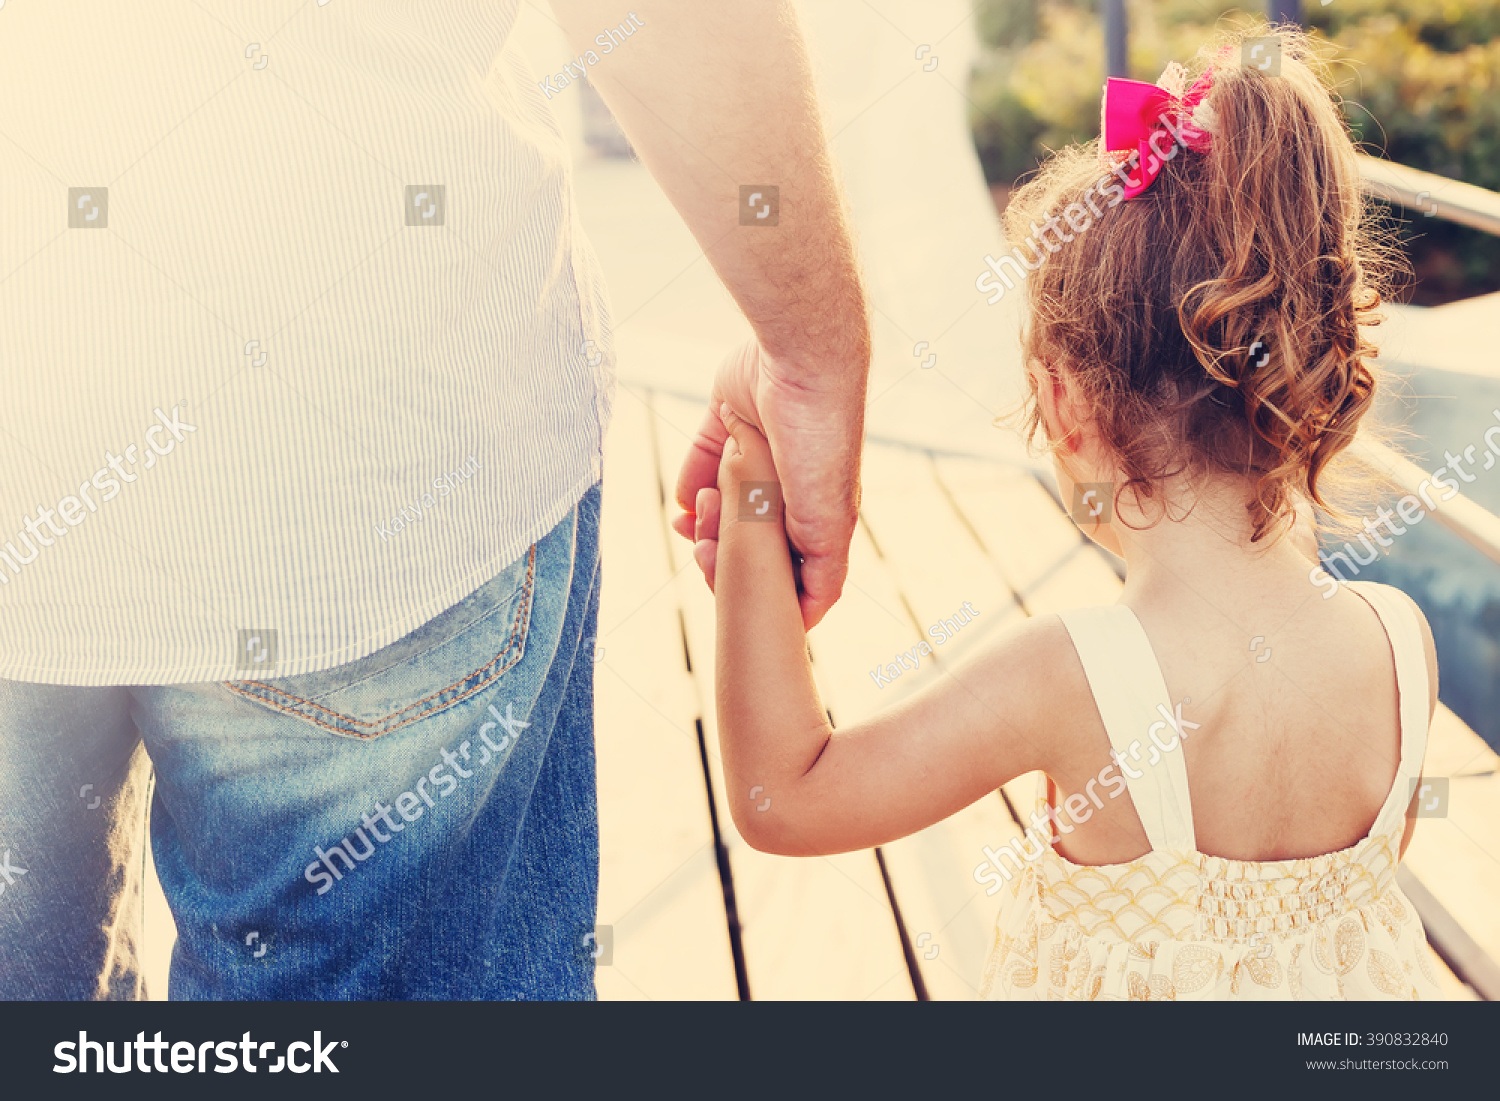 Toned portrait of Father and daughter holding hand in hand at sunset #390832840